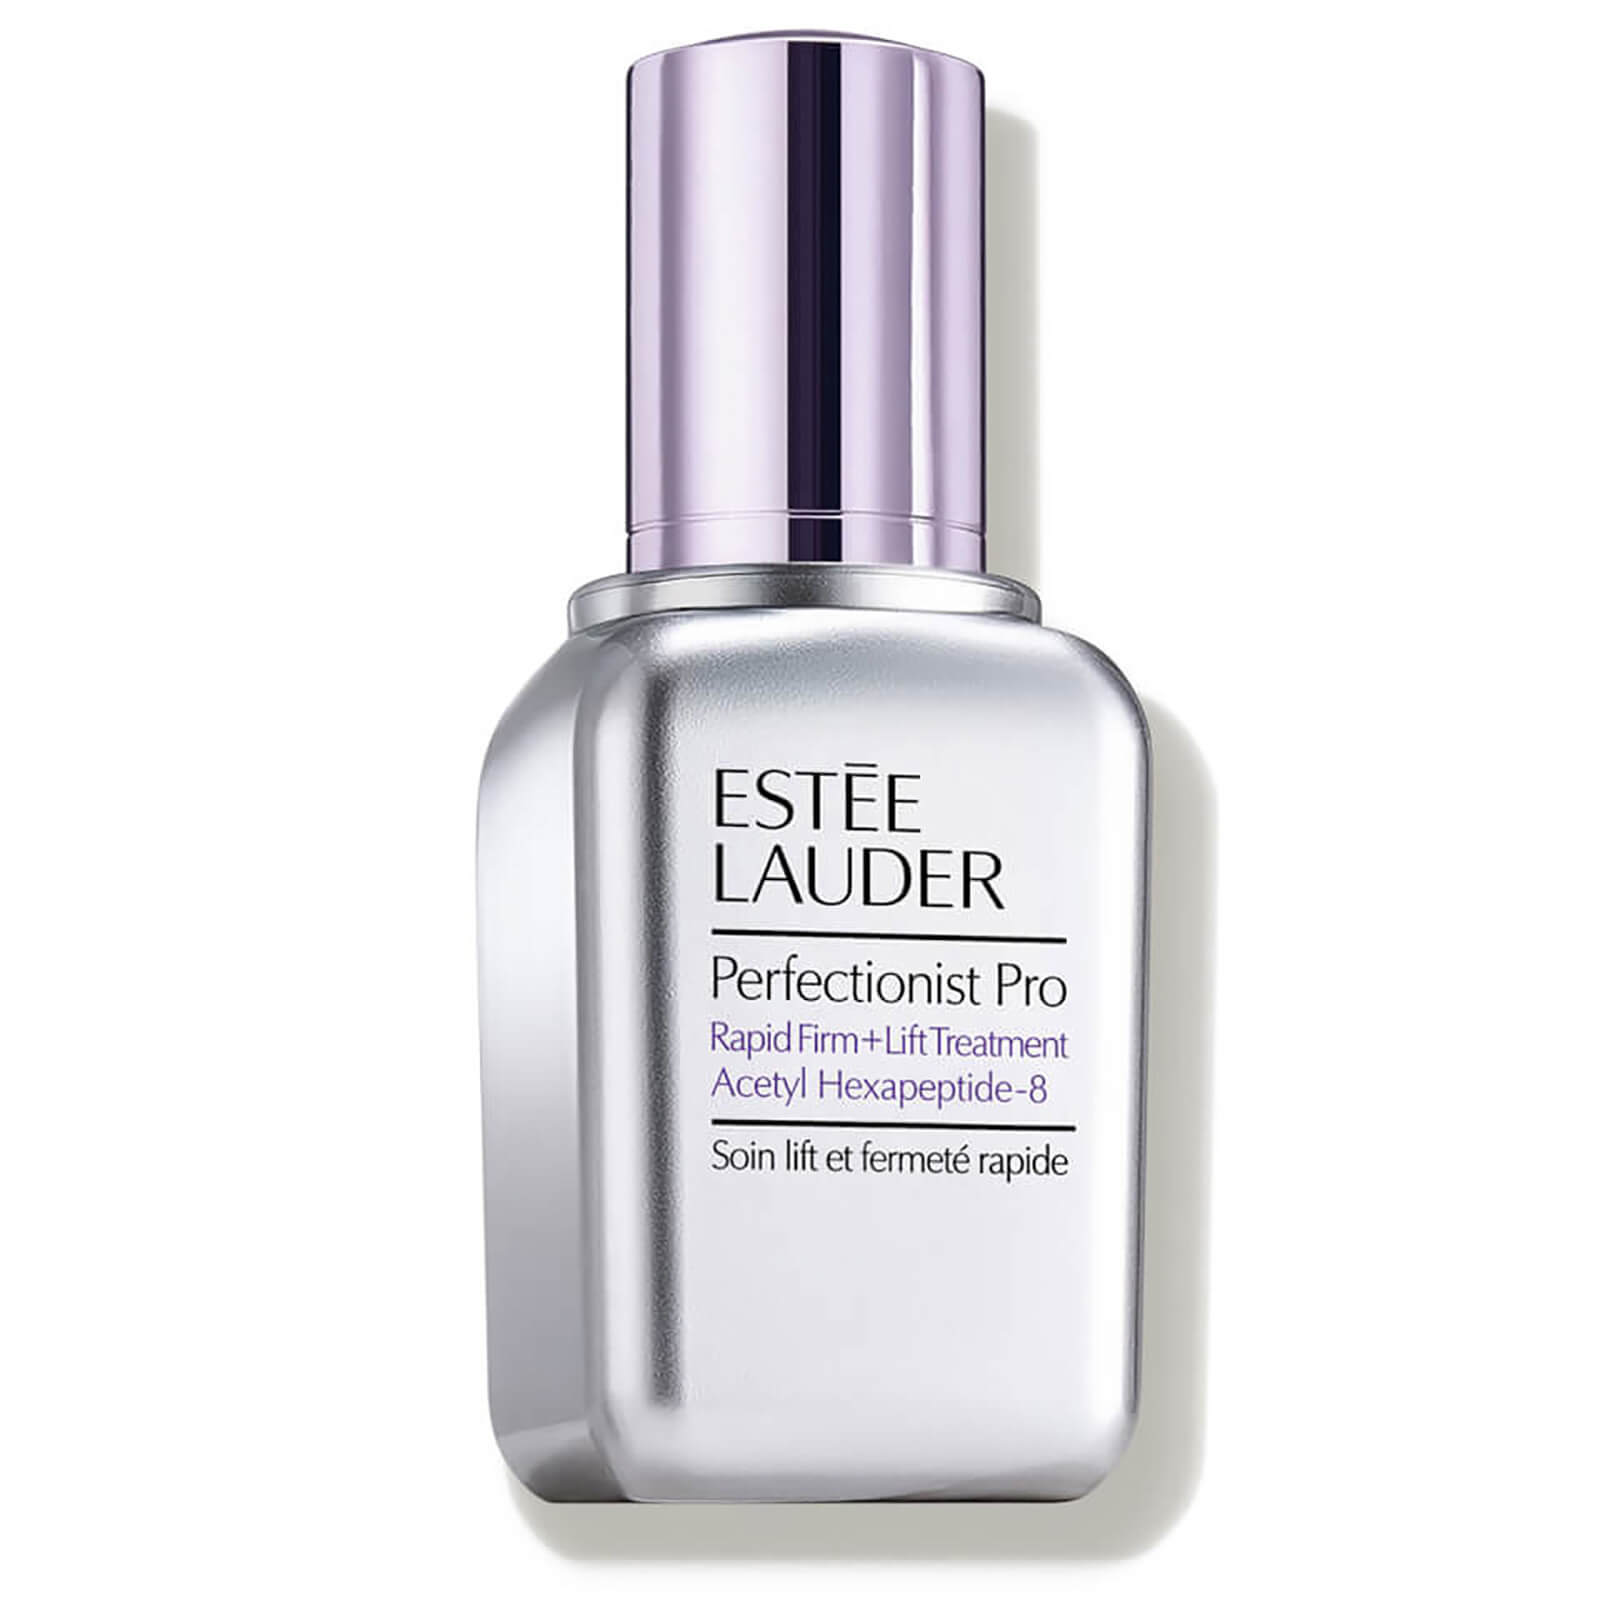 Image of Estée Lauder Perfectionist Pro Rapid Firm + Lift Treatment with Acetyl Hexapeptide-8 (Various Sizes) - 1.7 oz